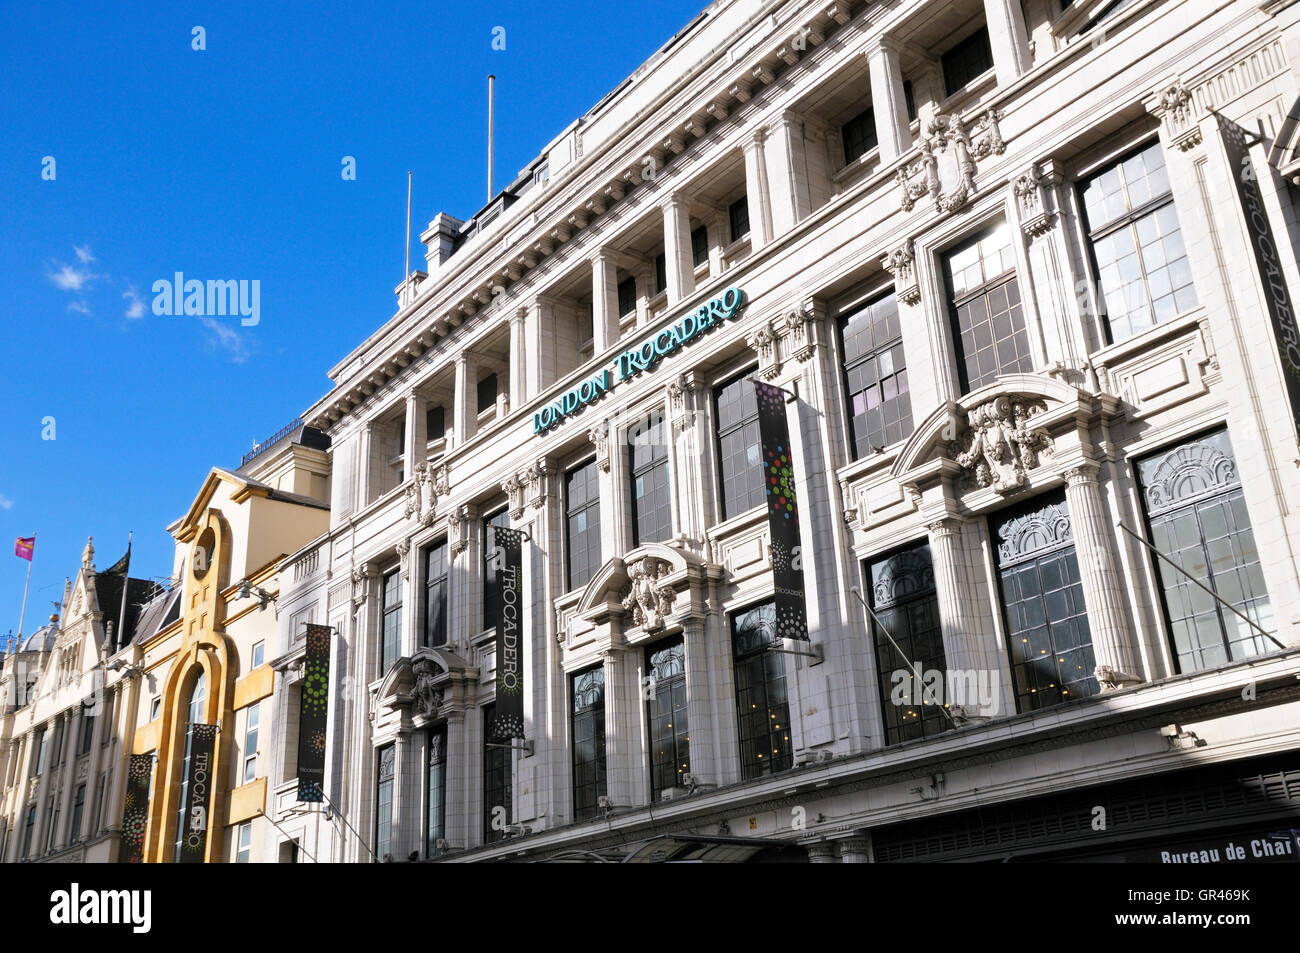 Trocadero di Londra in Coventry Street, West End, City of Westminster, Londra, Inghilterra, REGNO UNITO Foto Stock